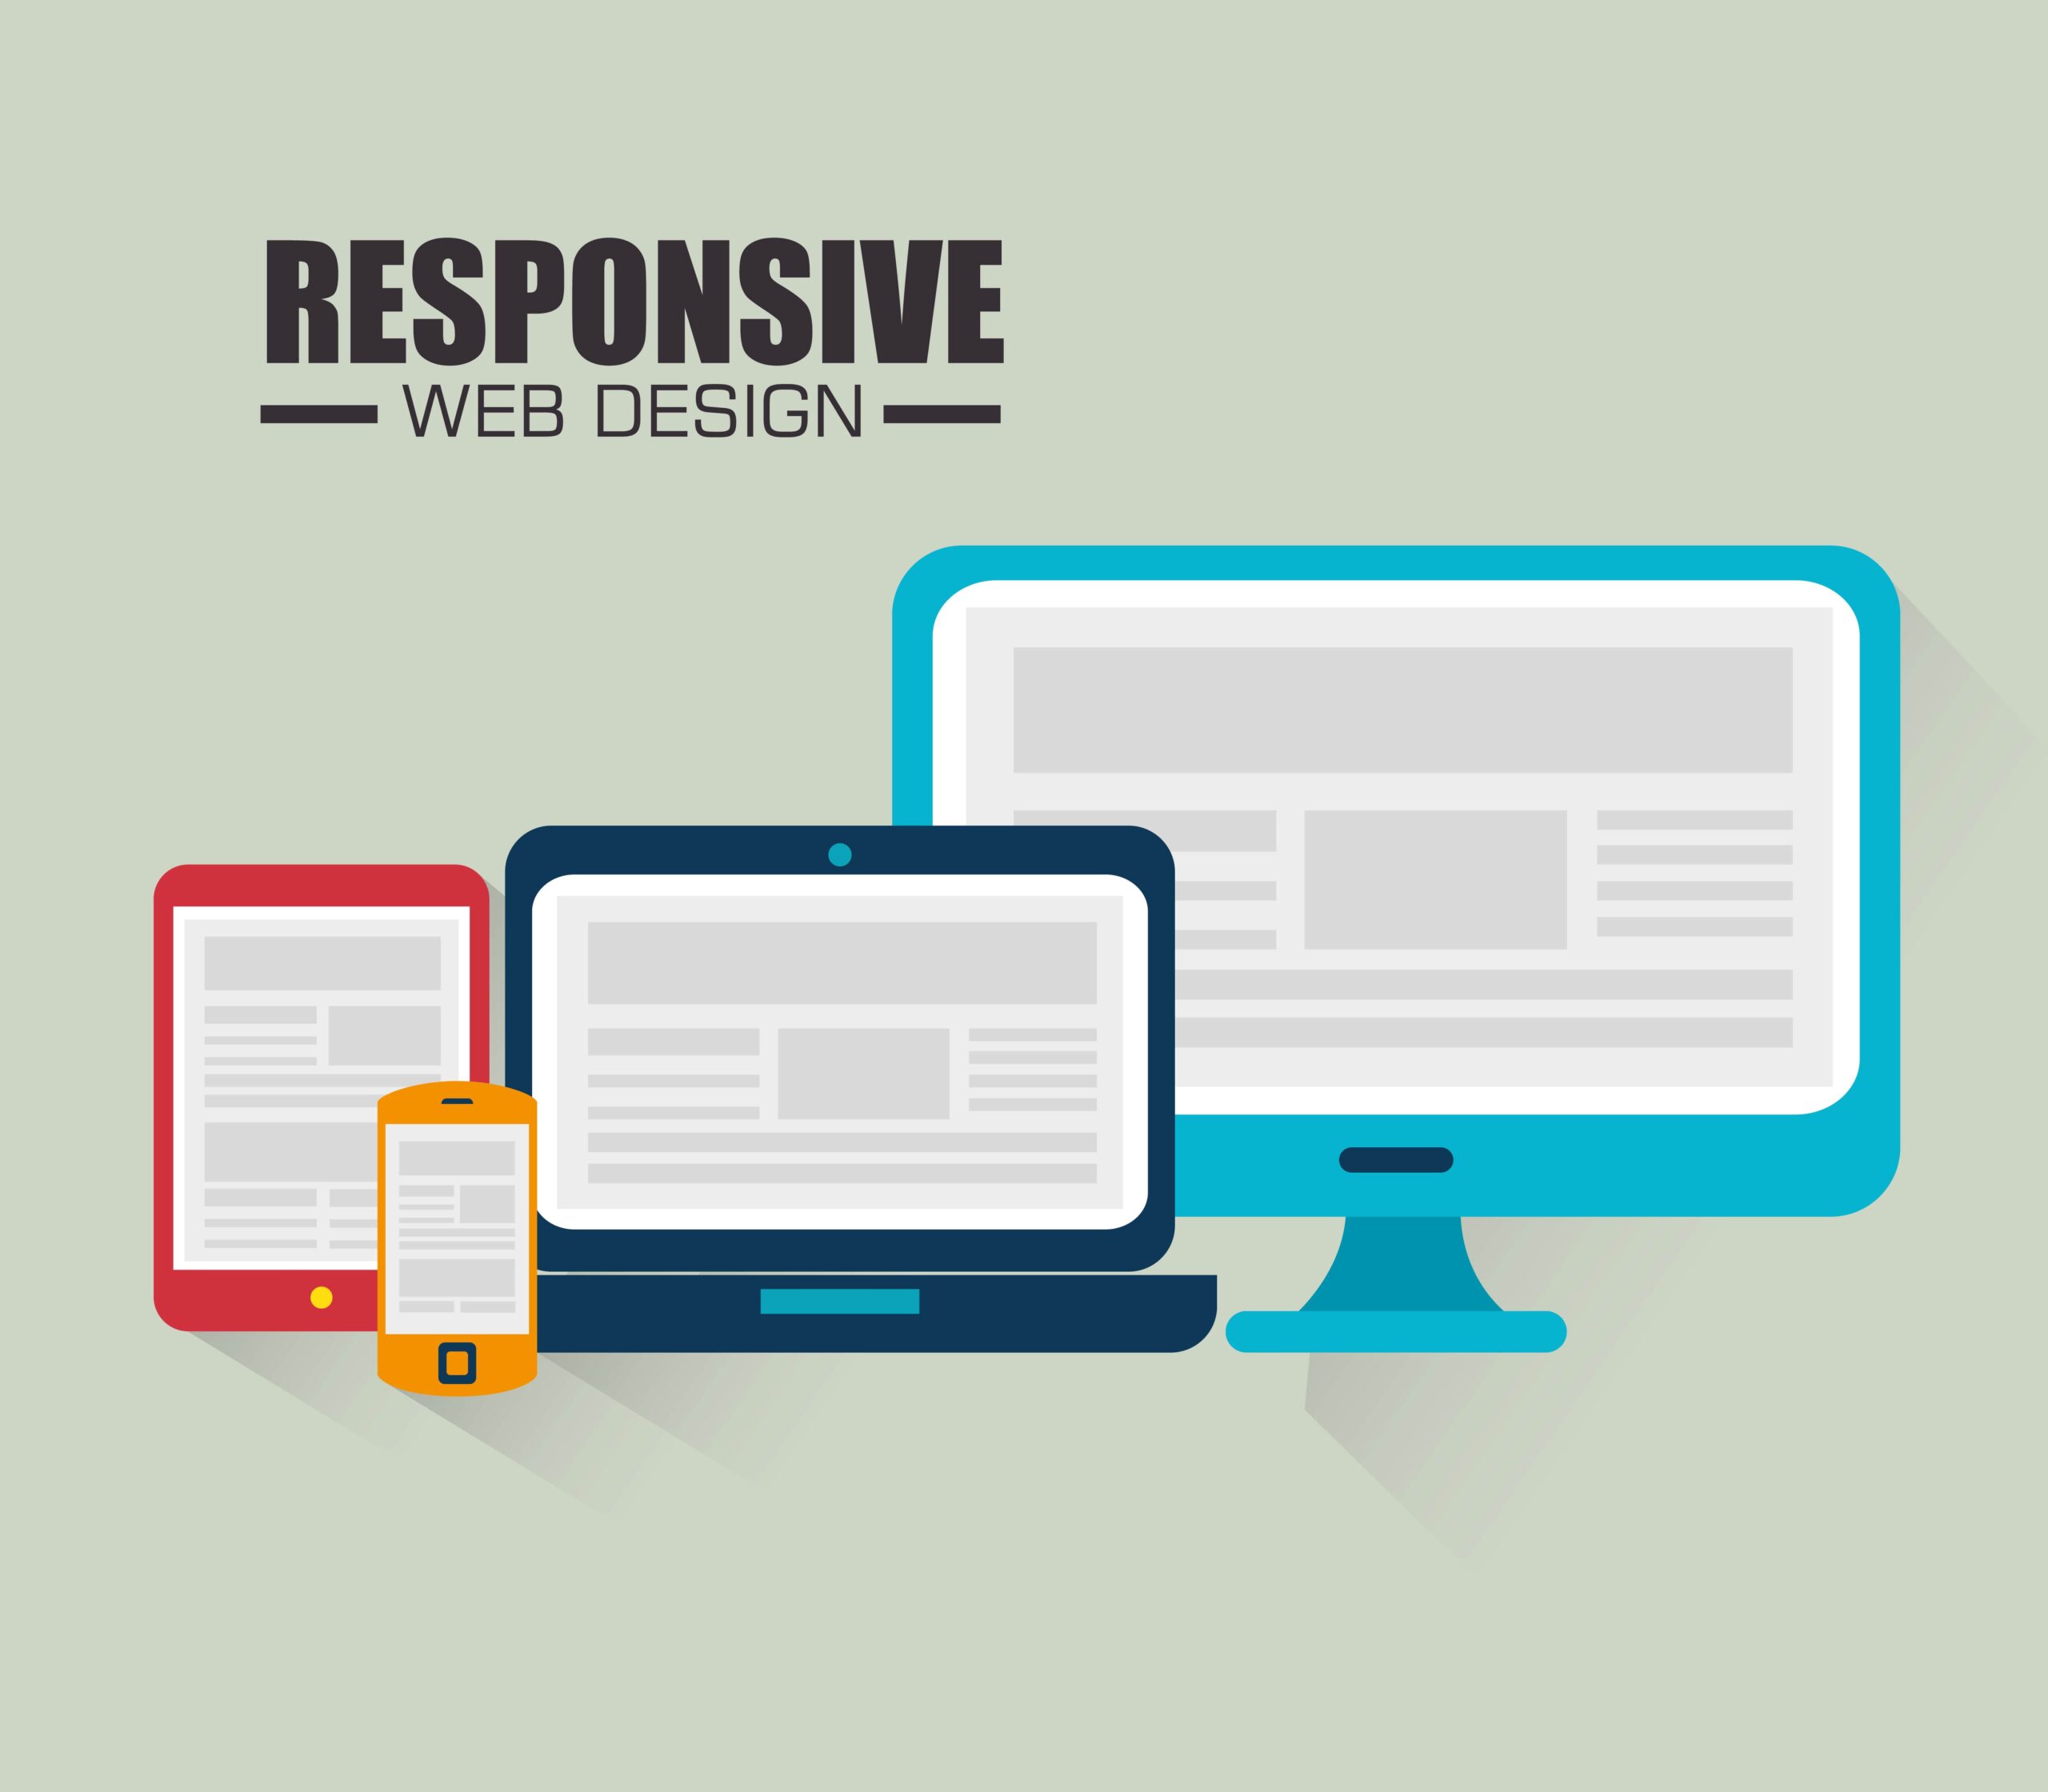 responsive website is designed to adapt to the user's device.